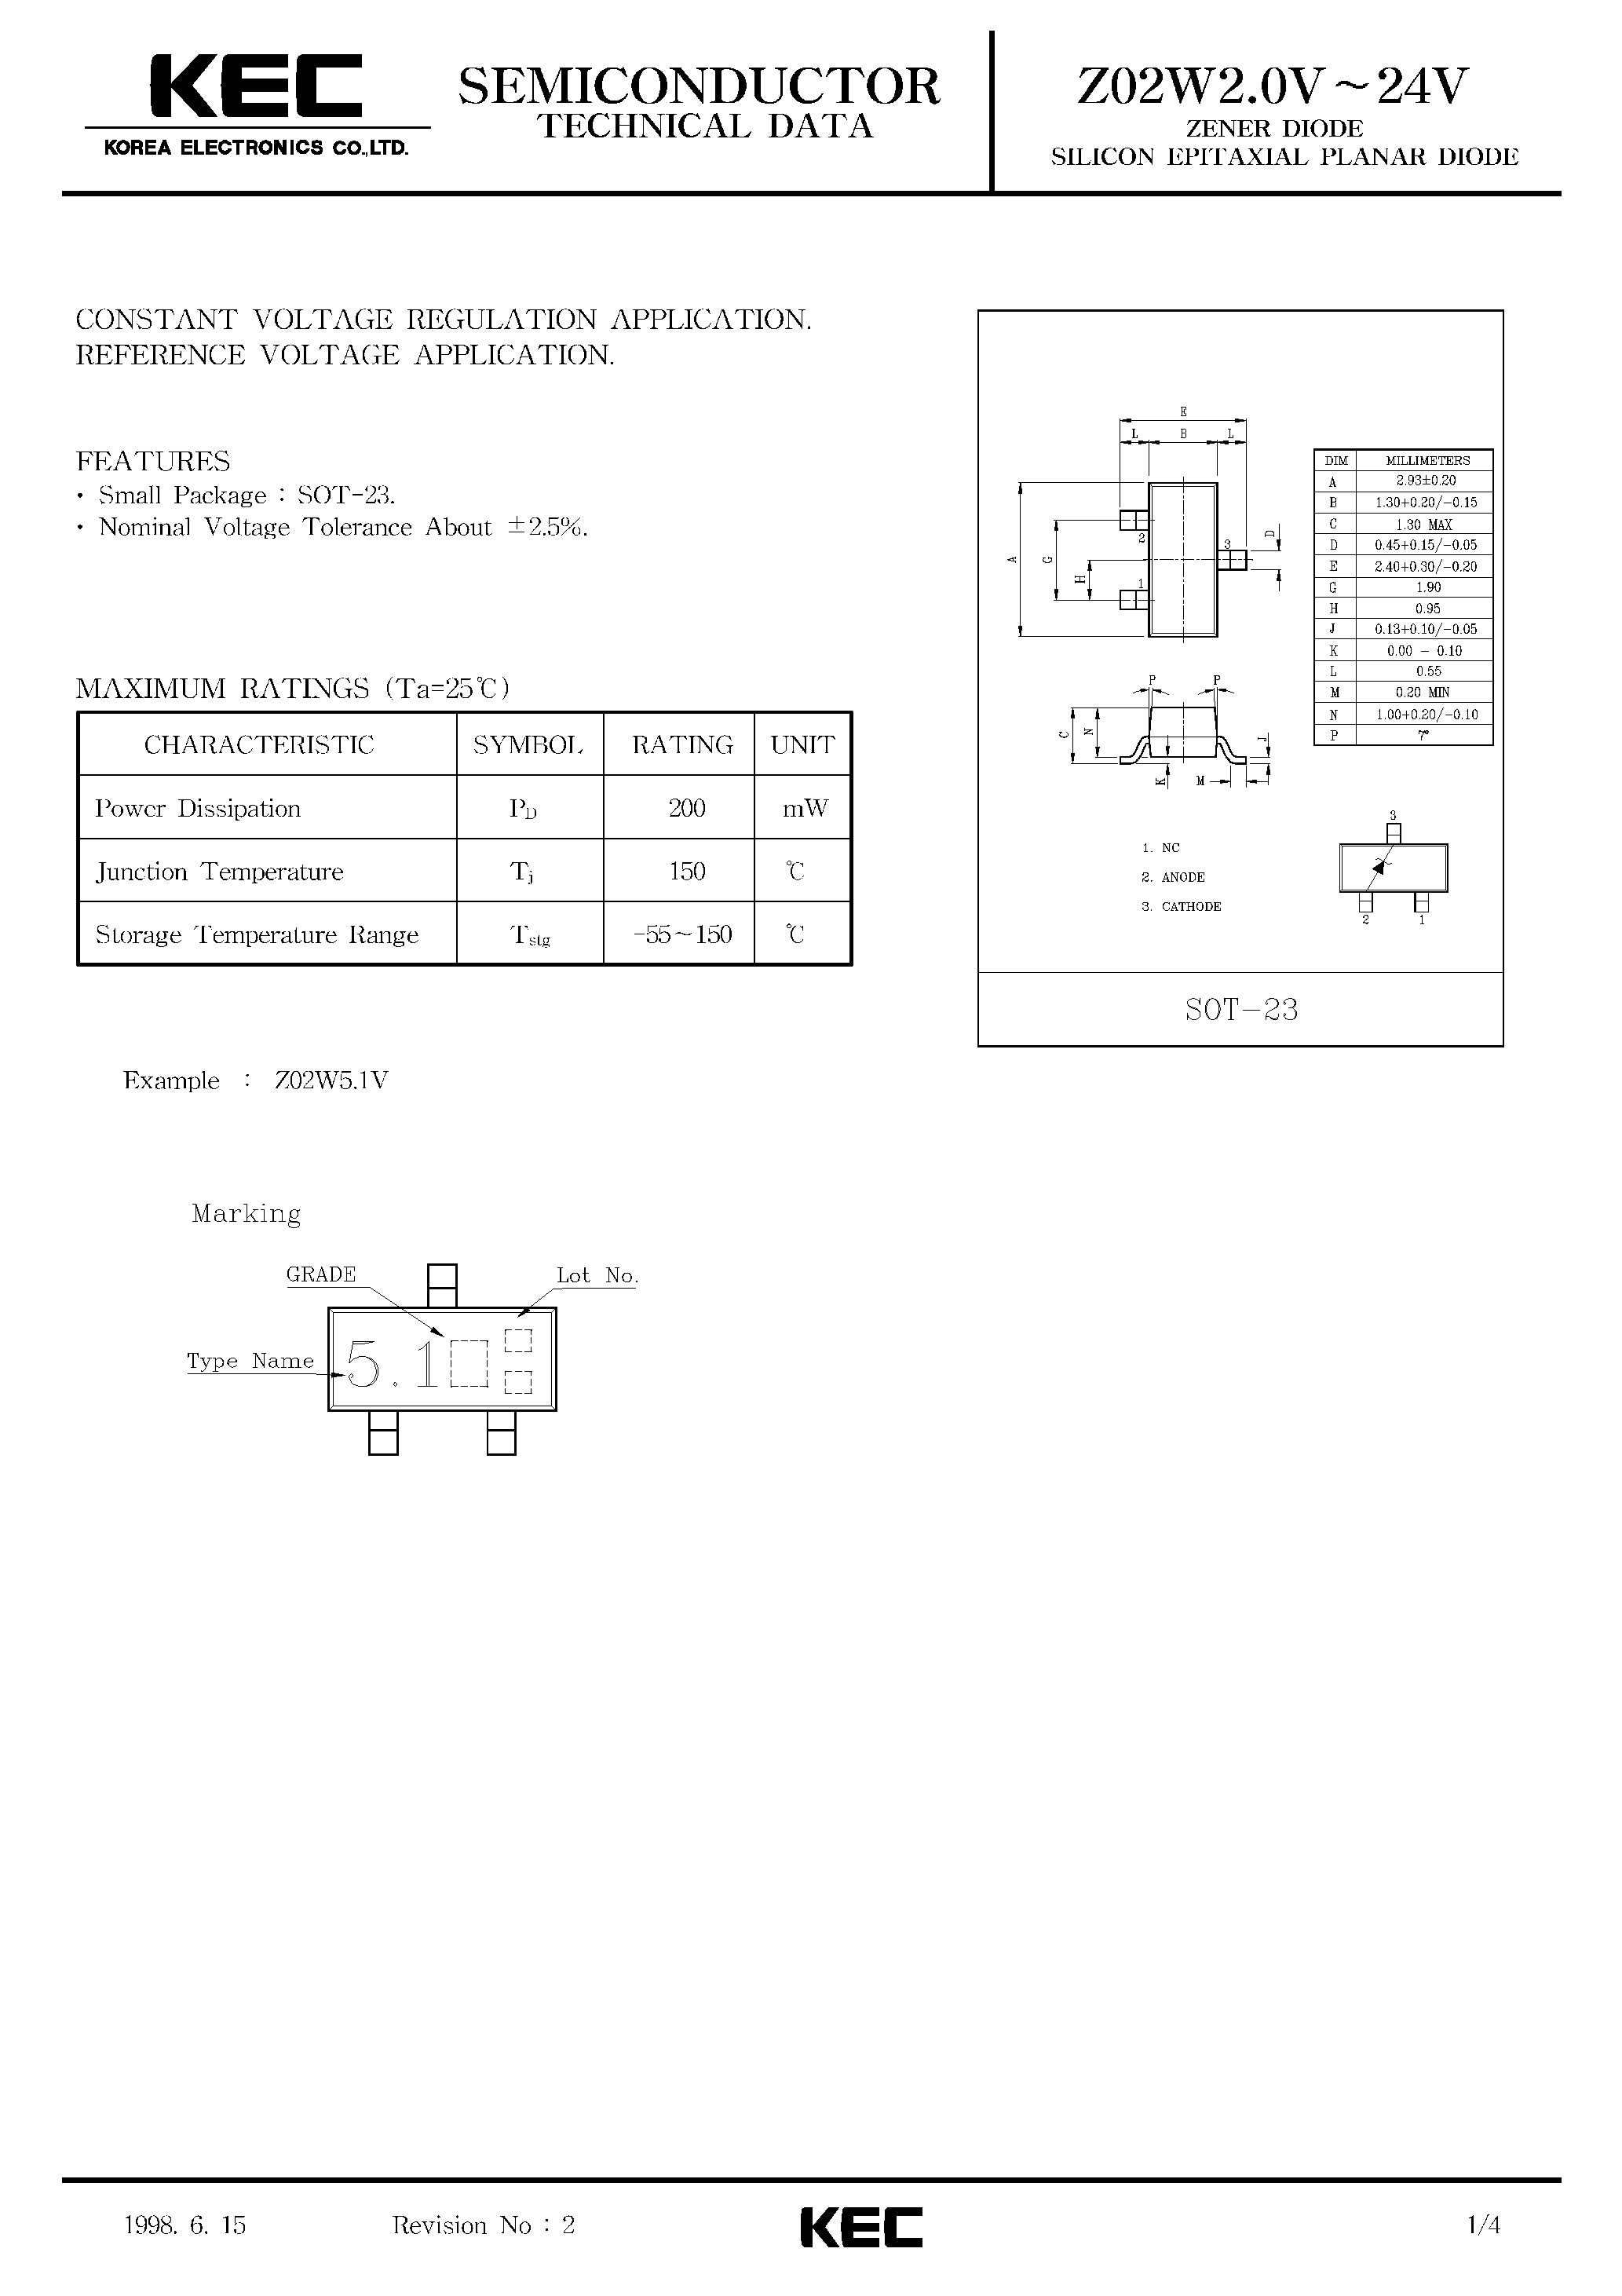 Datasheet Z02W3.3V - ZENER DIODE SILICON EPITAXIAL PLANAR DIODE page 1